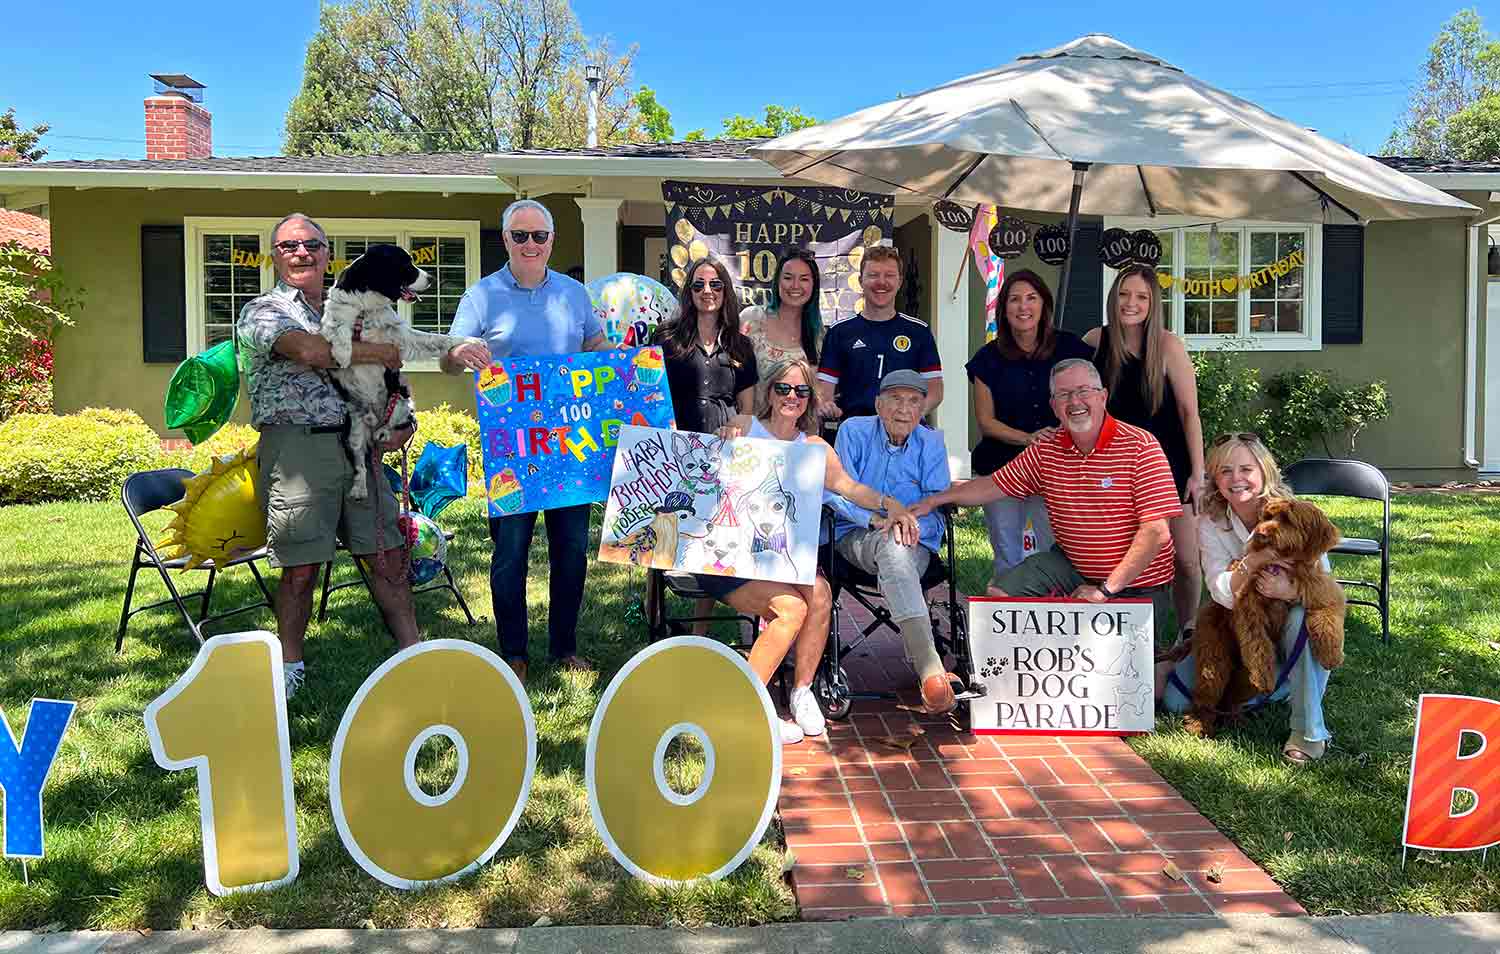 A group of people and two dogs pose in front of a home with birthday decorations, happy birthday signs, and the number 100.